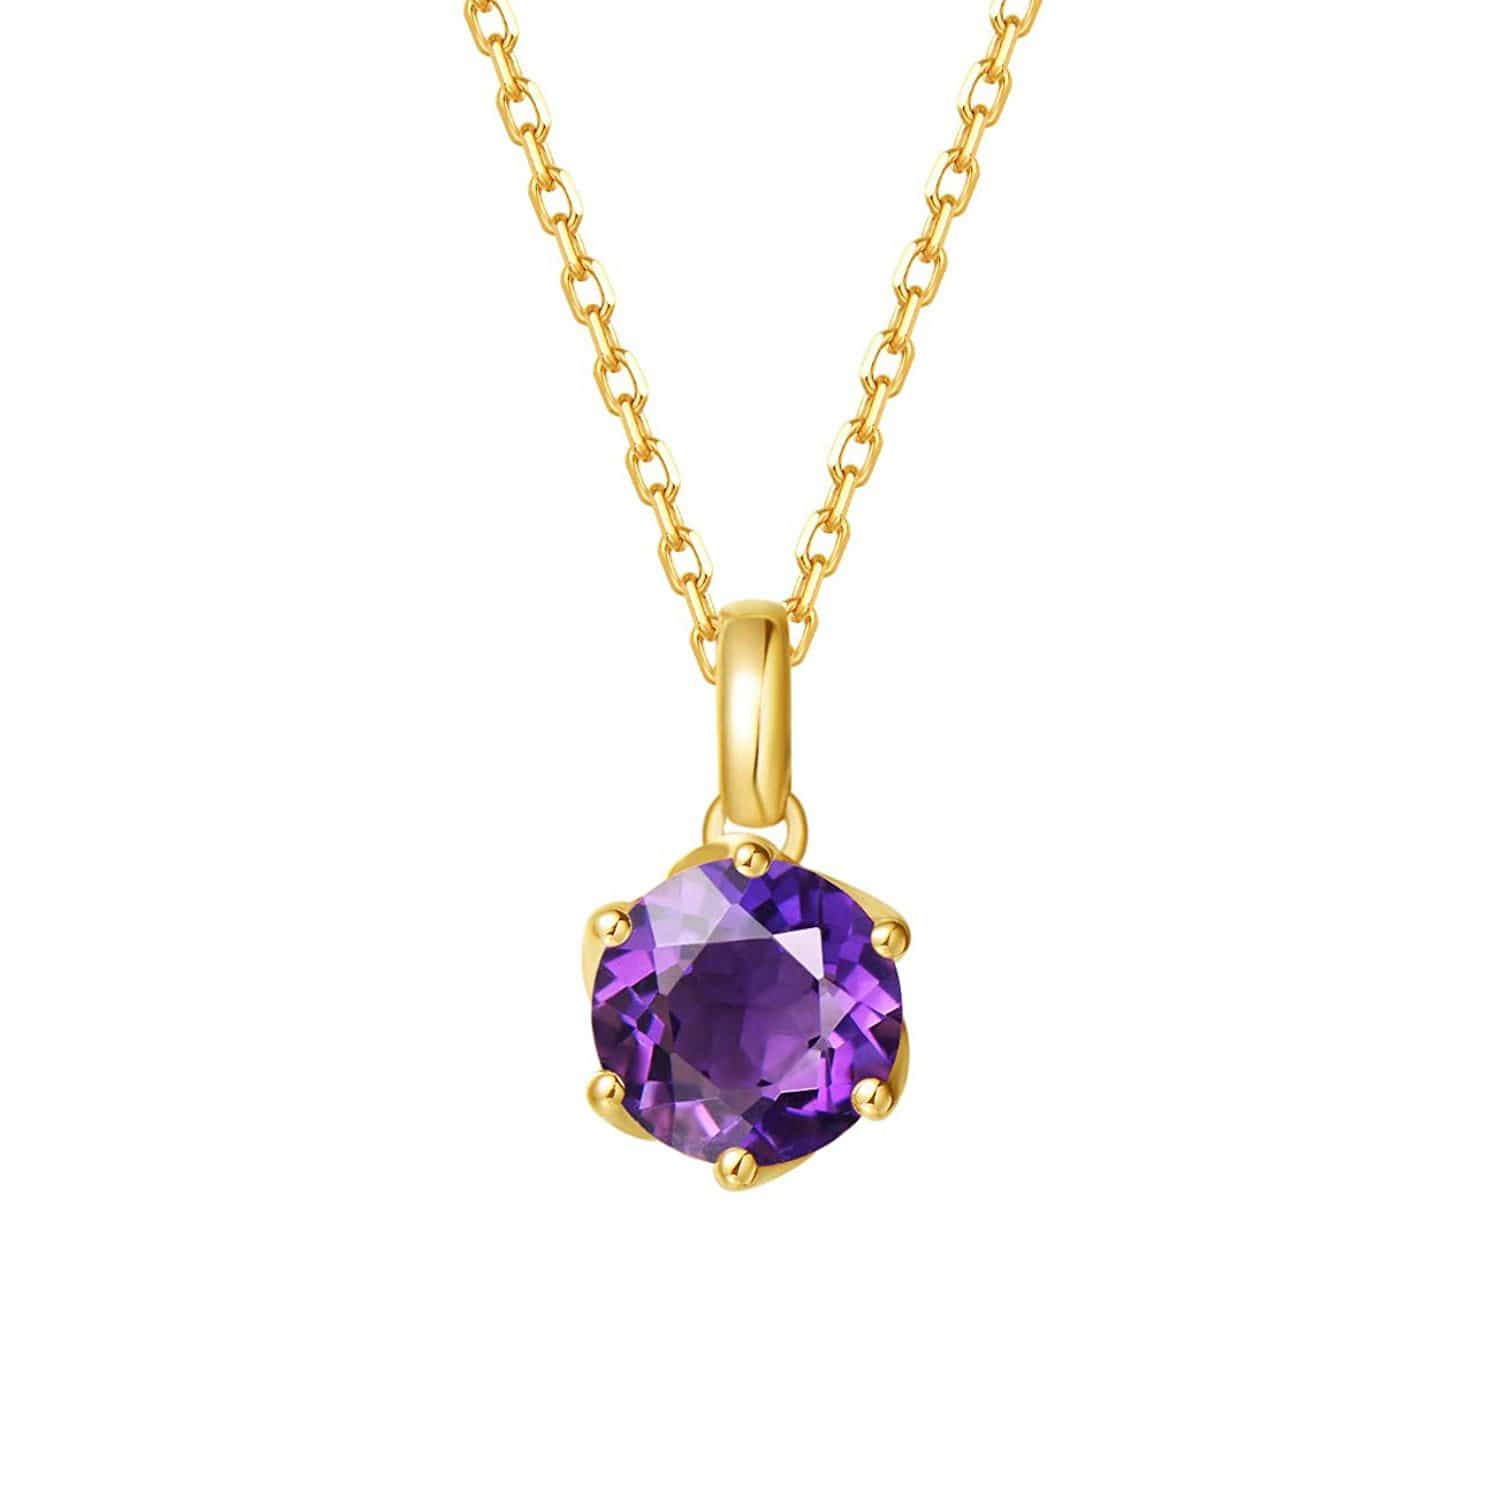 FANCIME Genuine Amethyst Solitaire 14K Yellow Gold Necklace Main